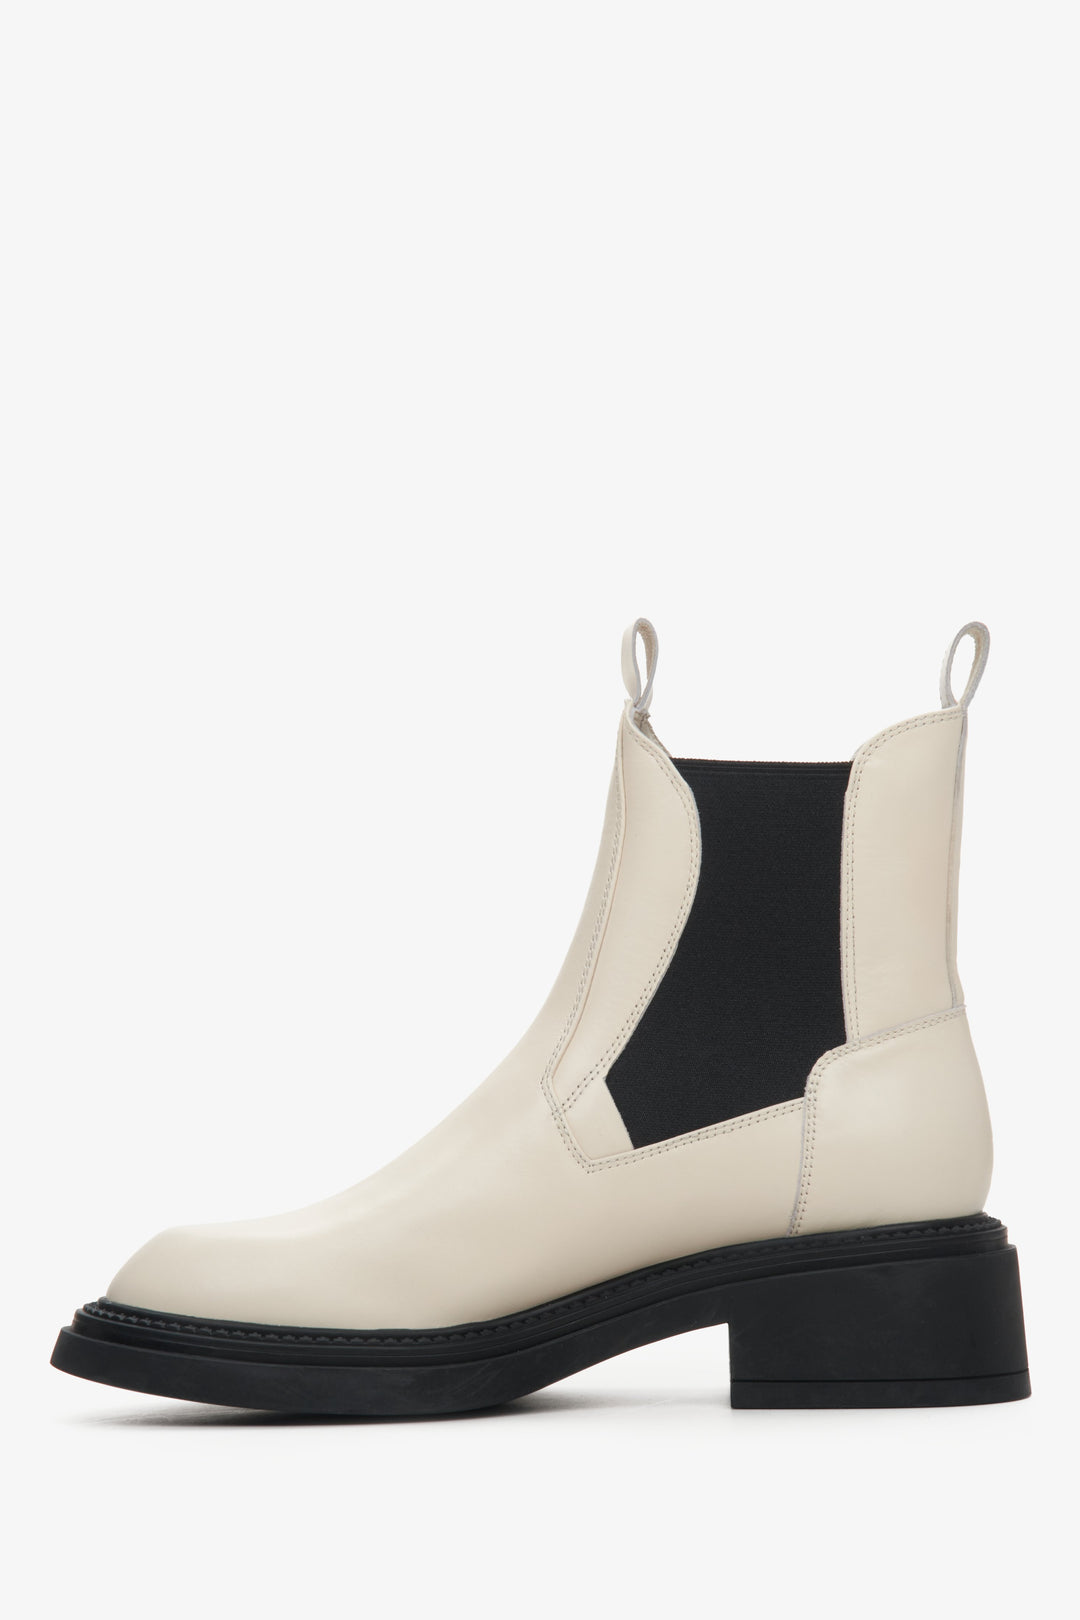 Beige and black leather chelsea boots - shoe profile.